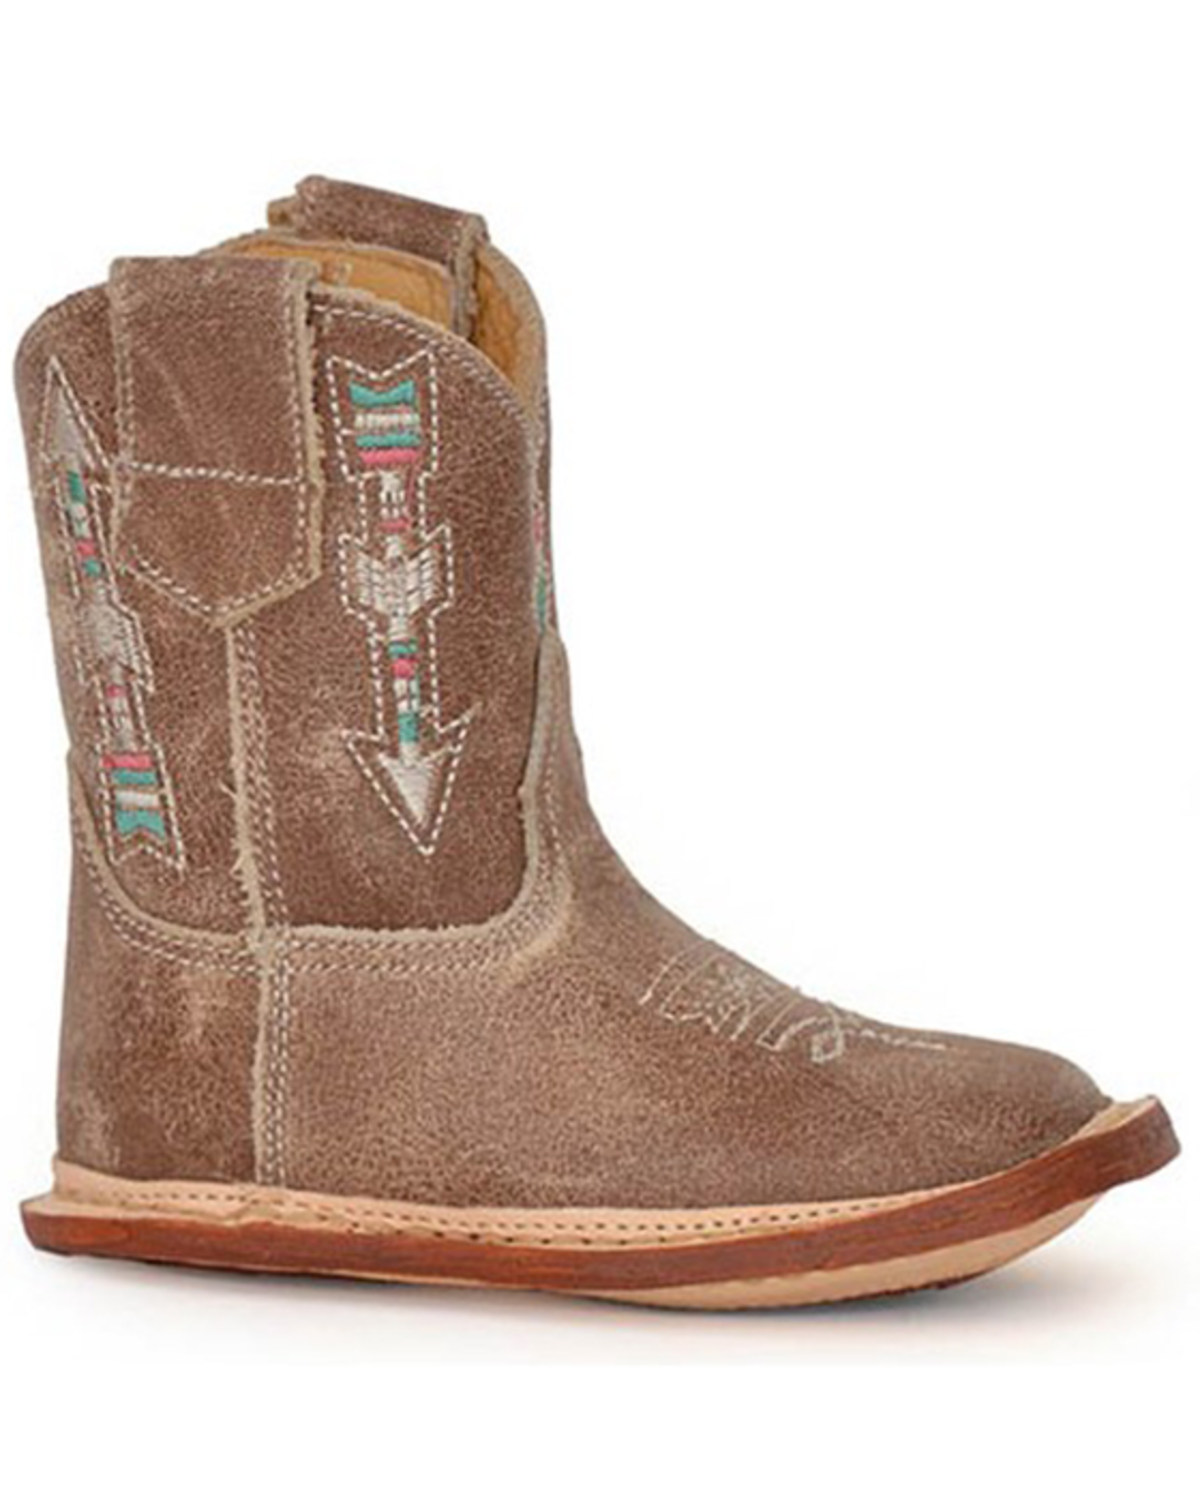 Roper Infant Girls' Indian Arrows Western Boots - Square Toe